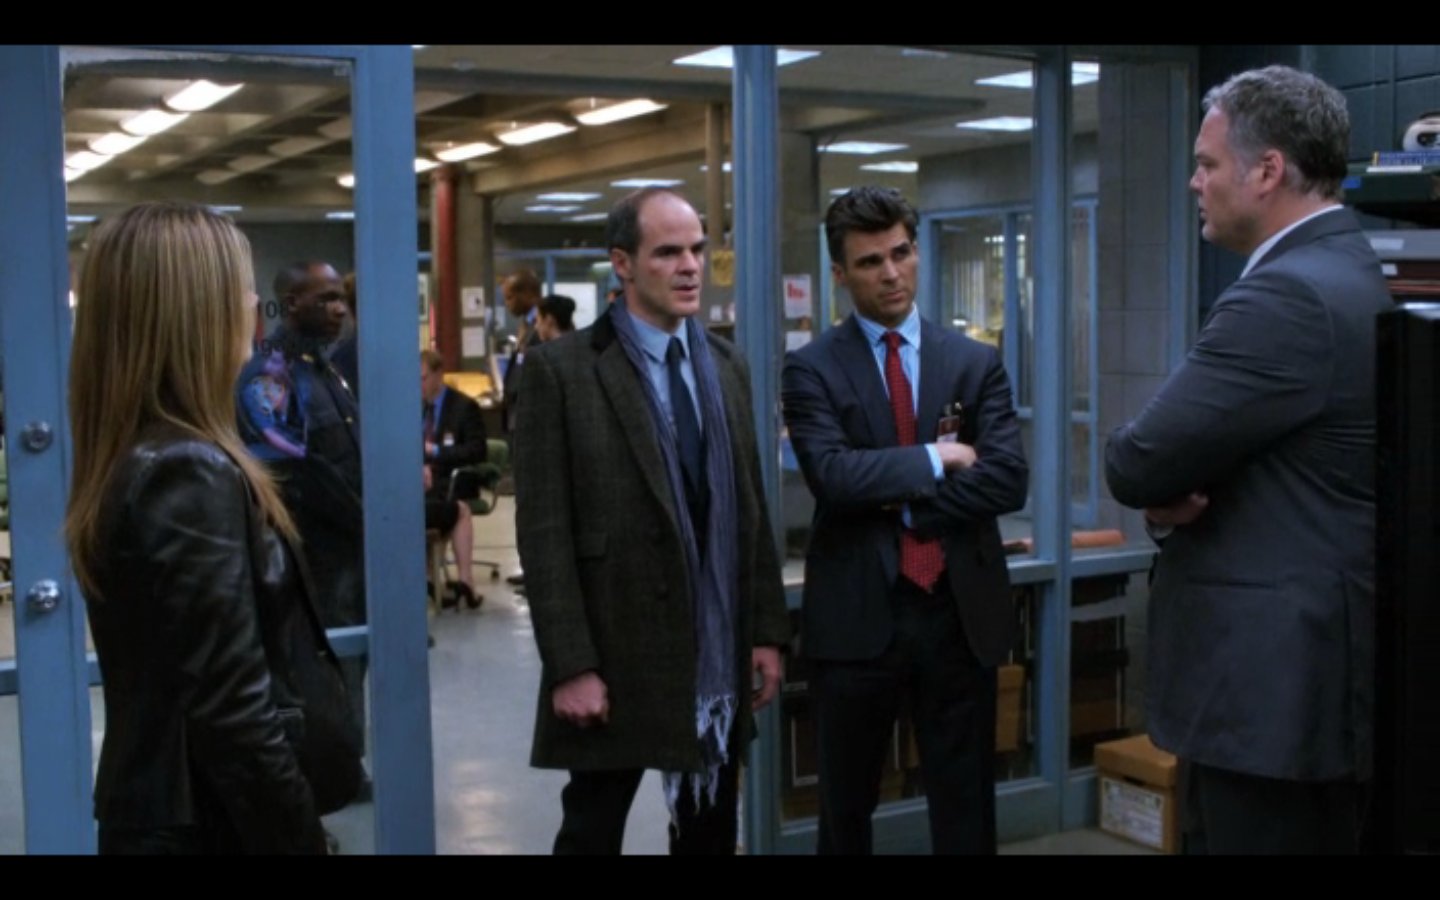 Law & Order: Criminal Intent: Boots on the Ground (2011 TV episode) - Kathryn Erbe, Vincent D'Onofrio, Emanuele Ancorini and Michael Kelly